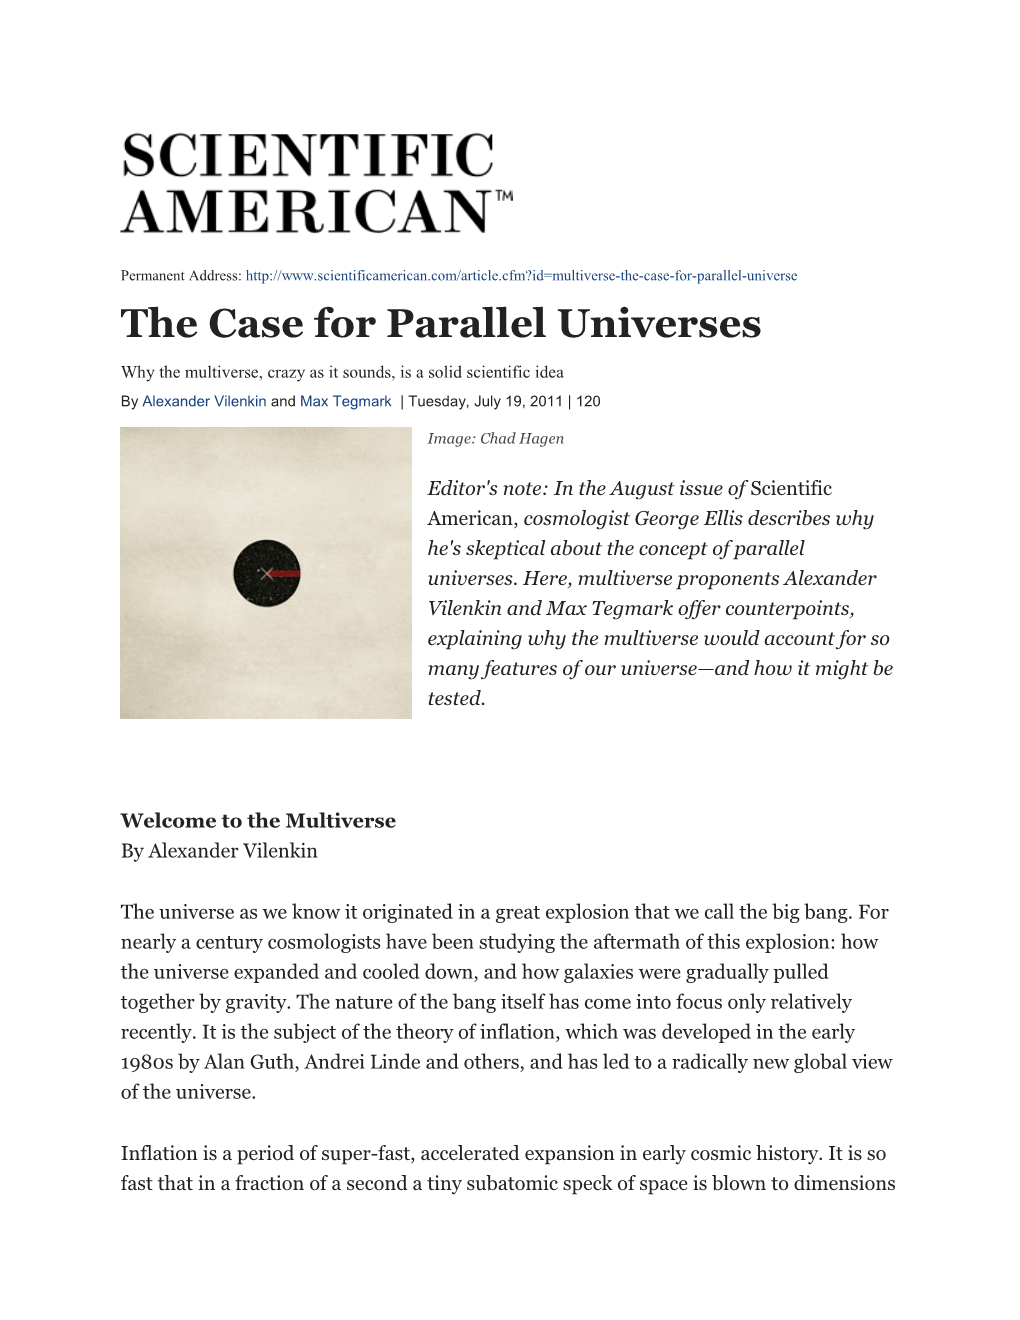 The Case for Parallel Universes